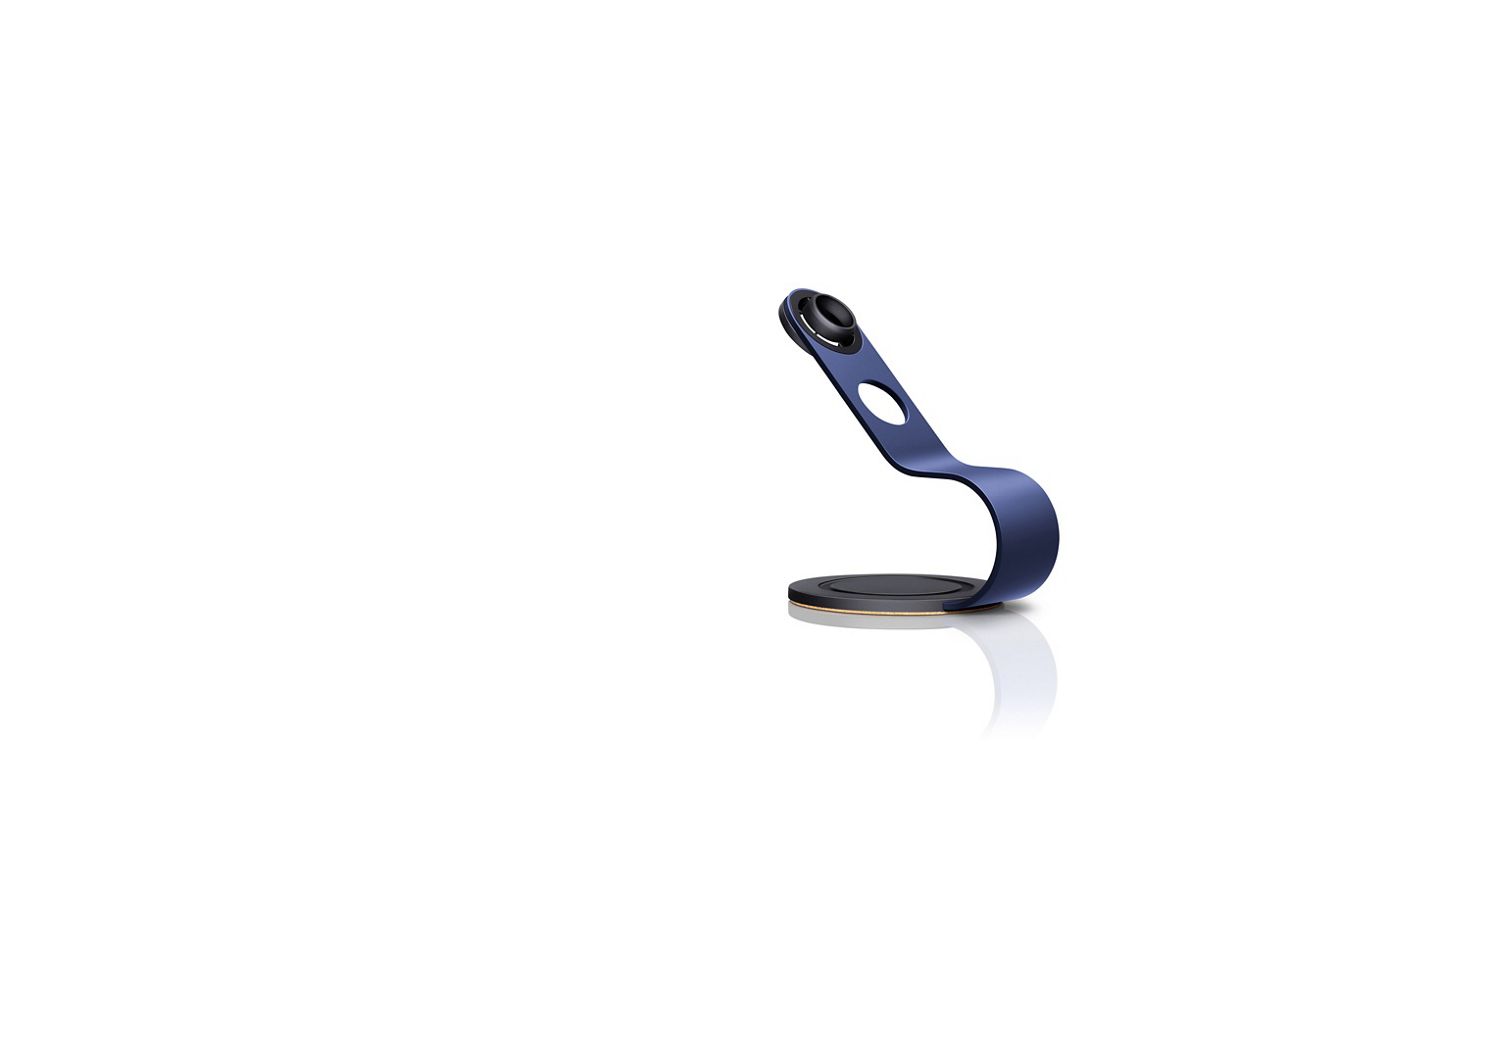 Dyson Supersonic™ hair dryer stand